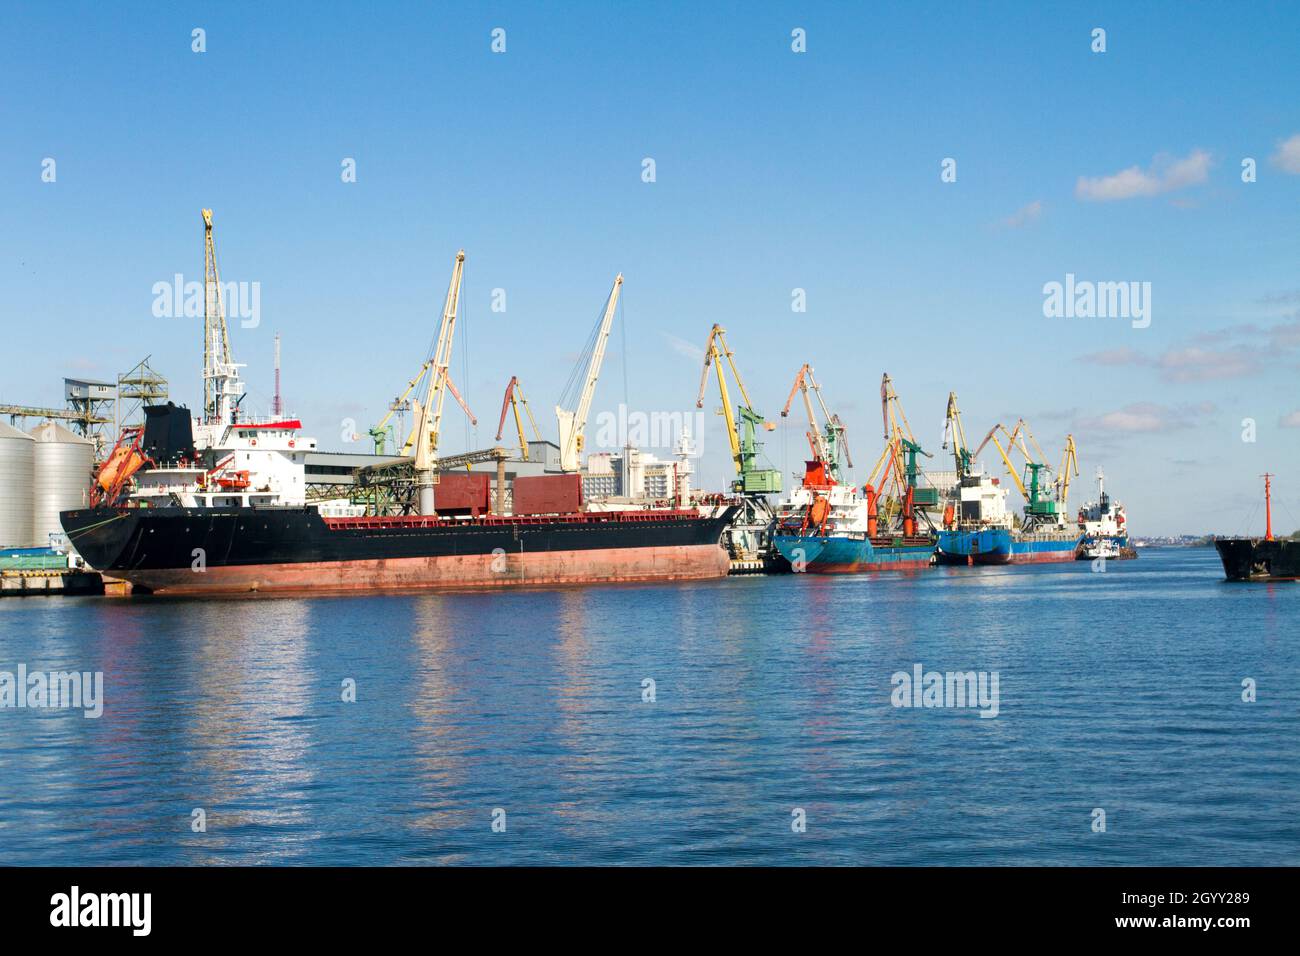 image of sea ships loading tower cranes in port Stock Photo